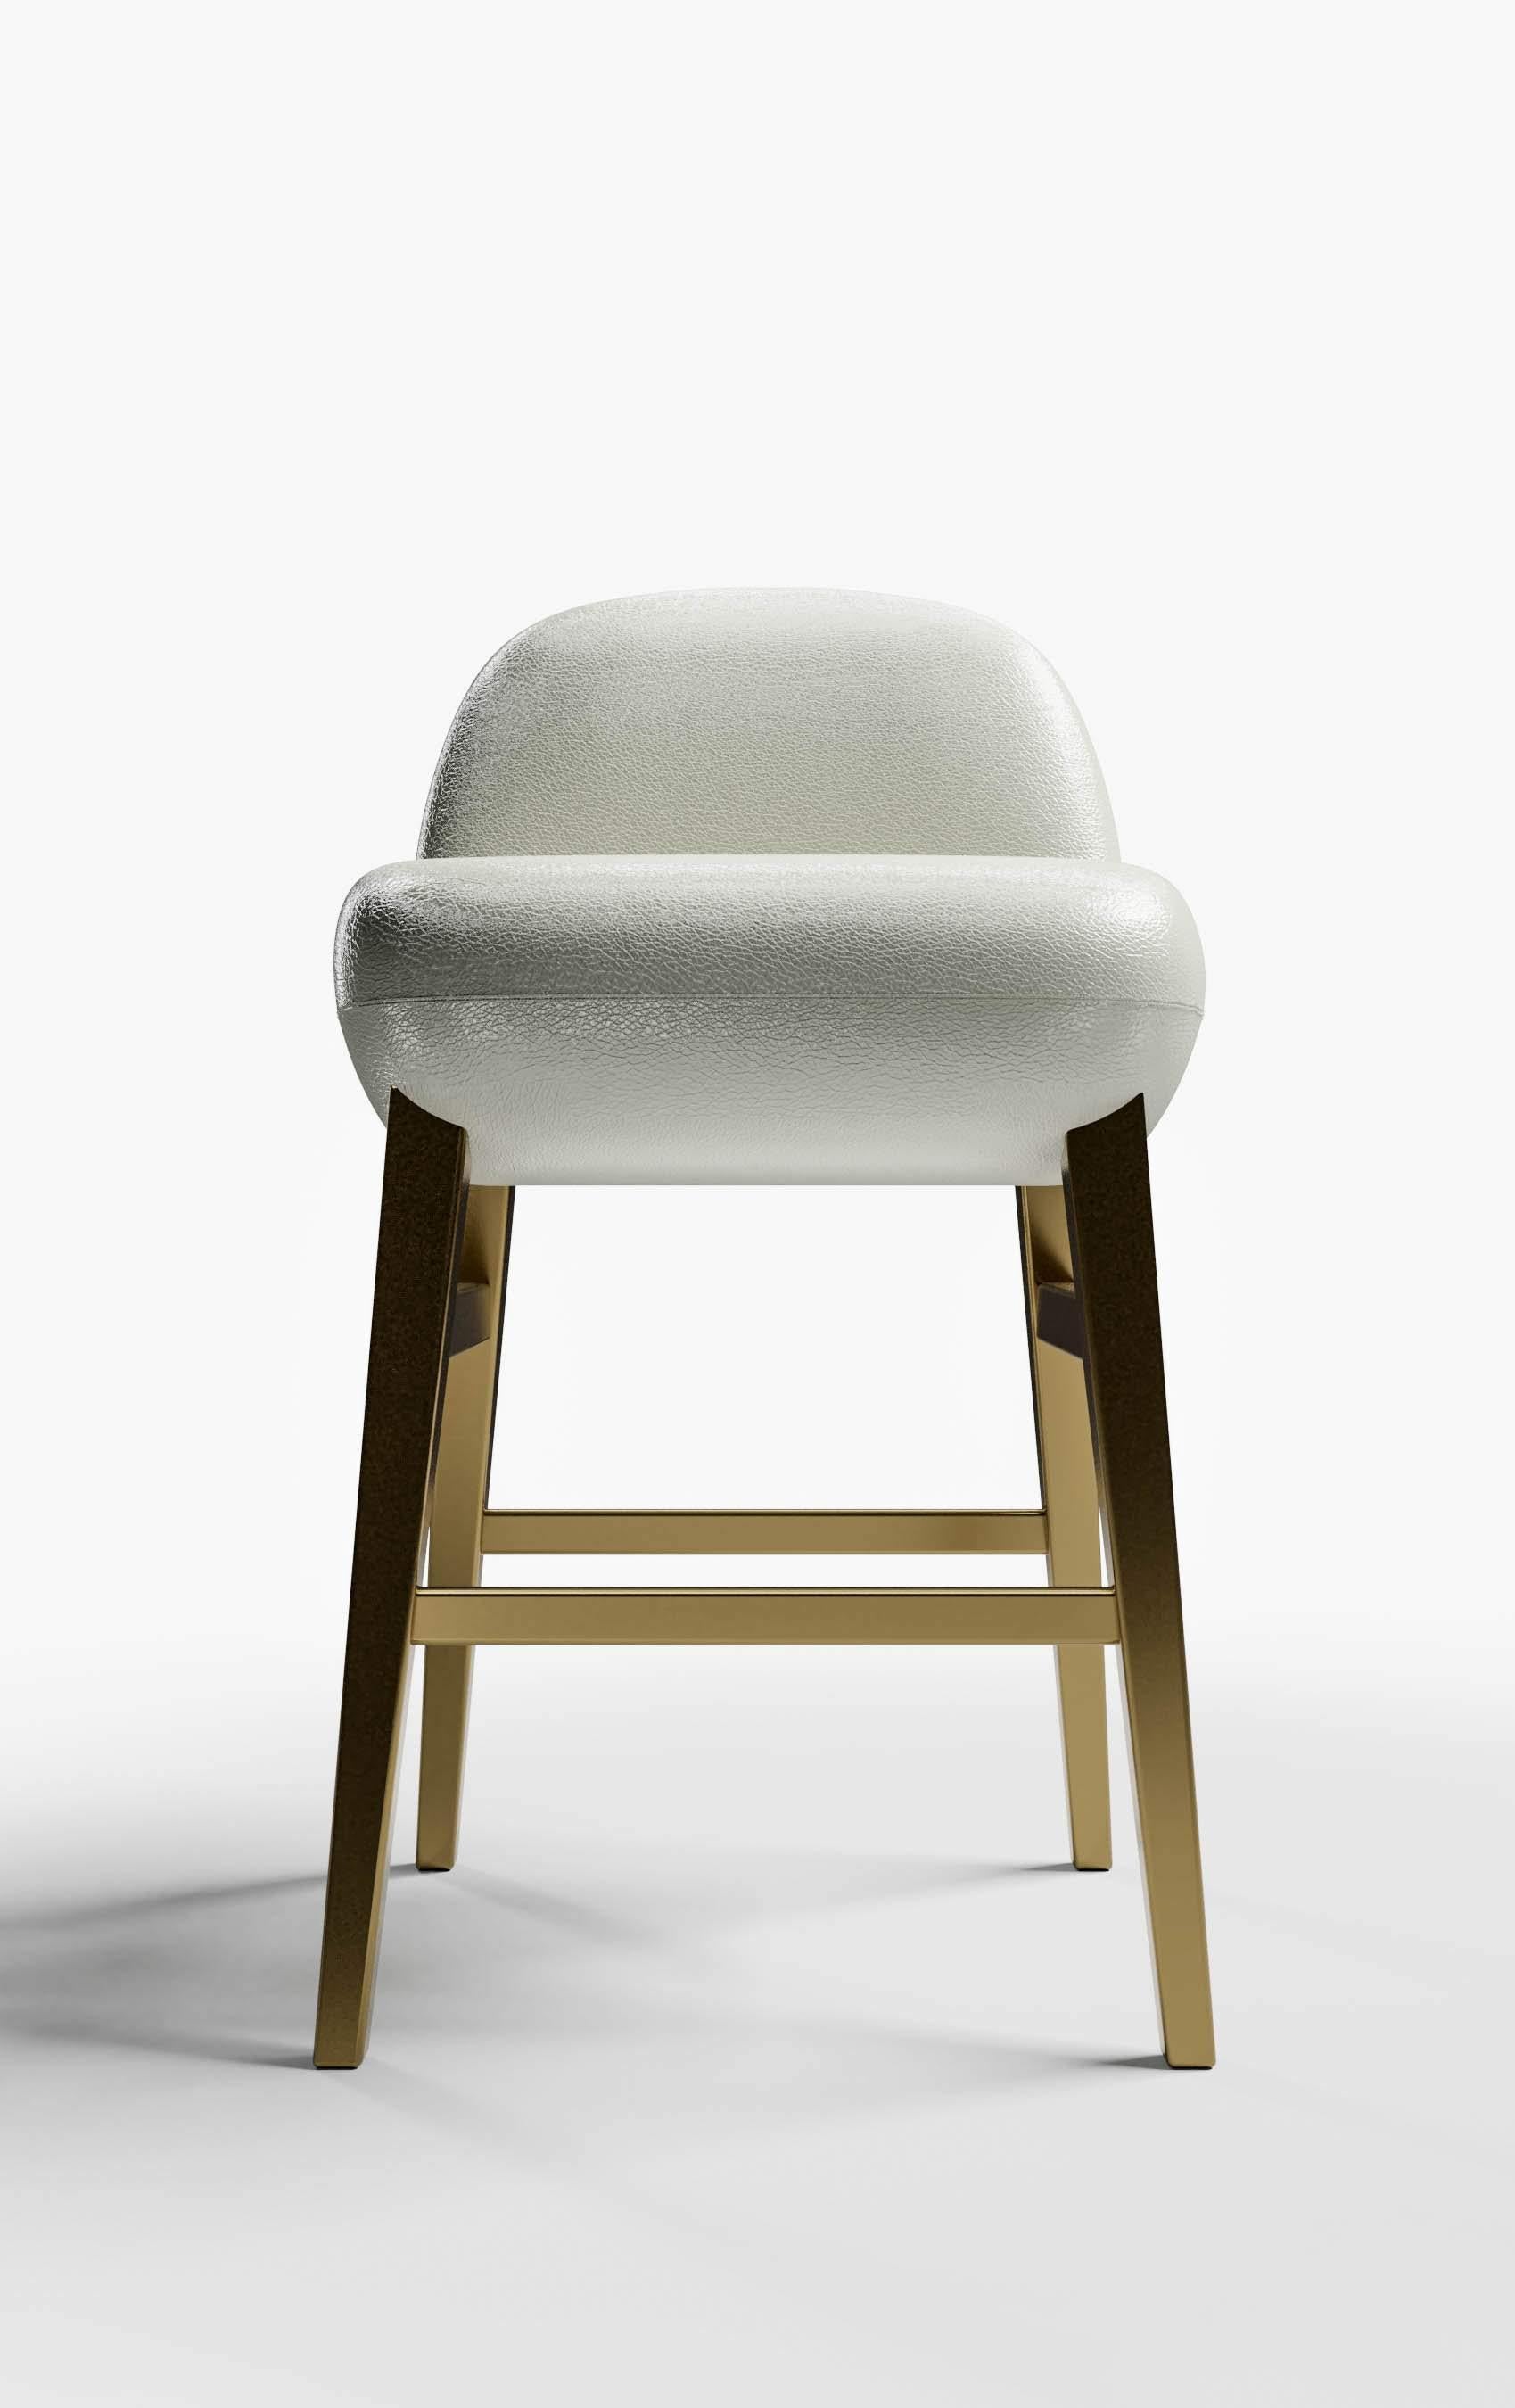 The Carmel barstool is like sitting on a cloud. Its inviting posture and dynamic metallic base will be sure to create a stir from your guests. The Carmel barstool can be upholstered in a variety of leathers and fabrics and is shown in Lealpell